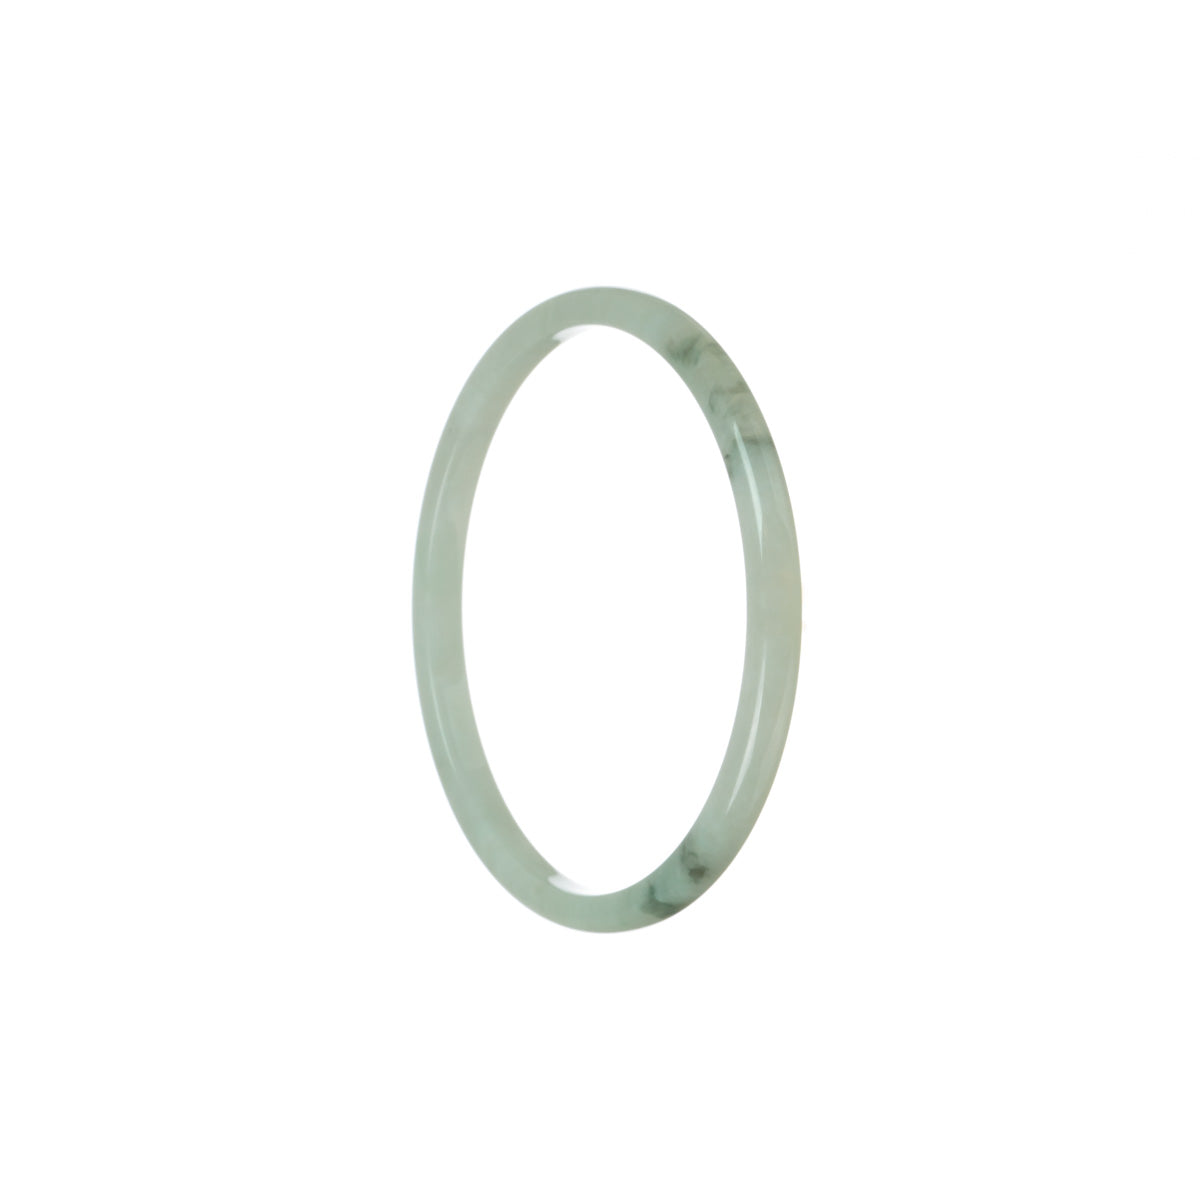 A close-up photo of a pale green Jadeite bangle with a flat surface, measuring 54mm in diameter. The bangle has a smooth texture and a beautiful, natural grade A Jadeite stone.